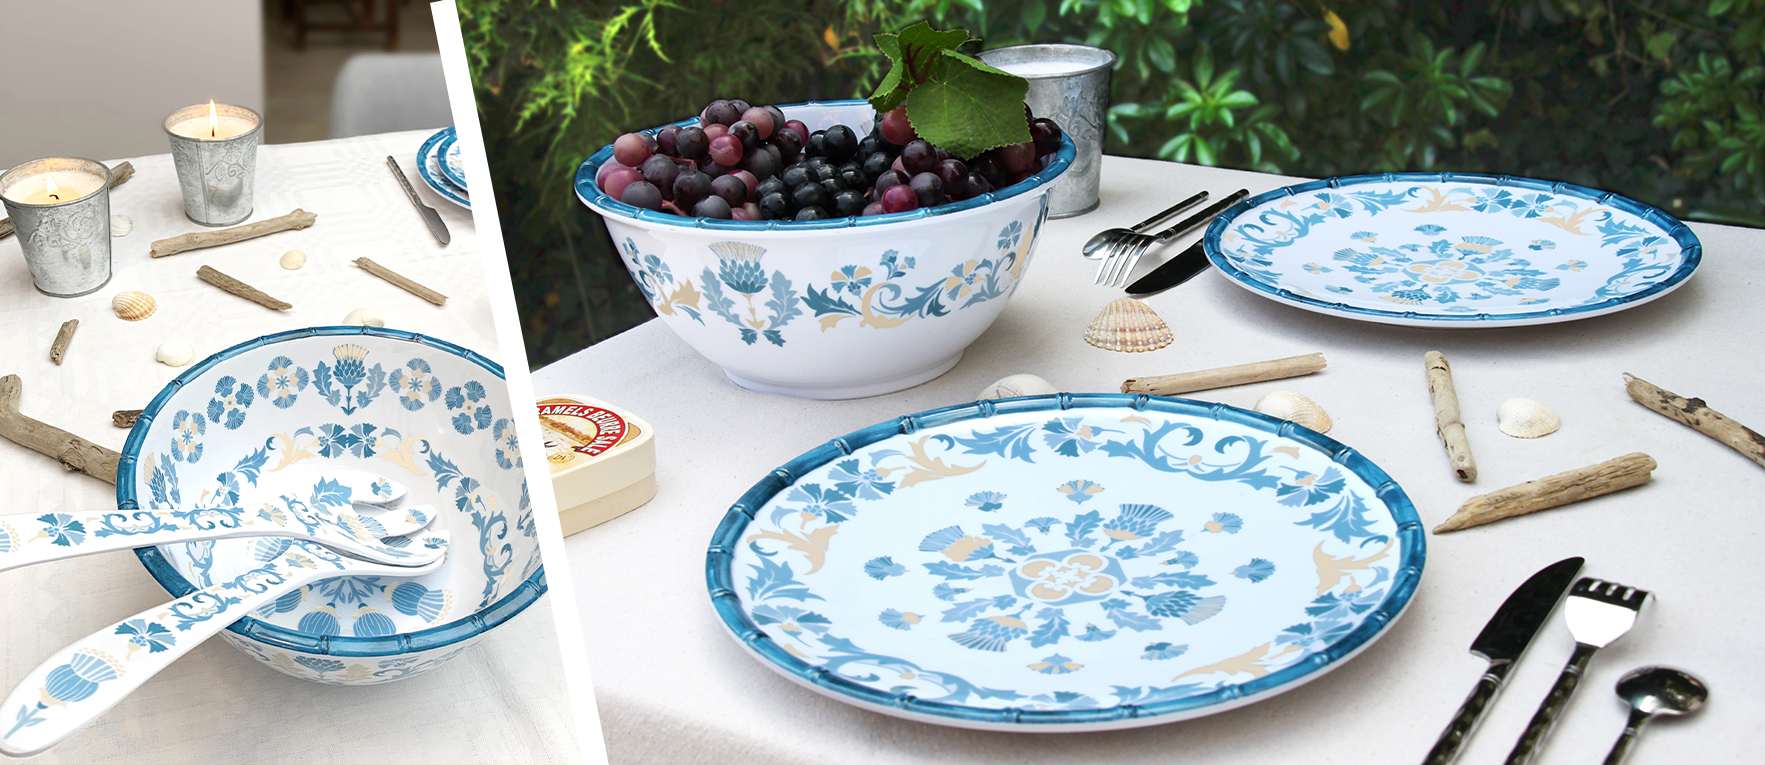 unbreakable tableware collection with melamine floral motifs